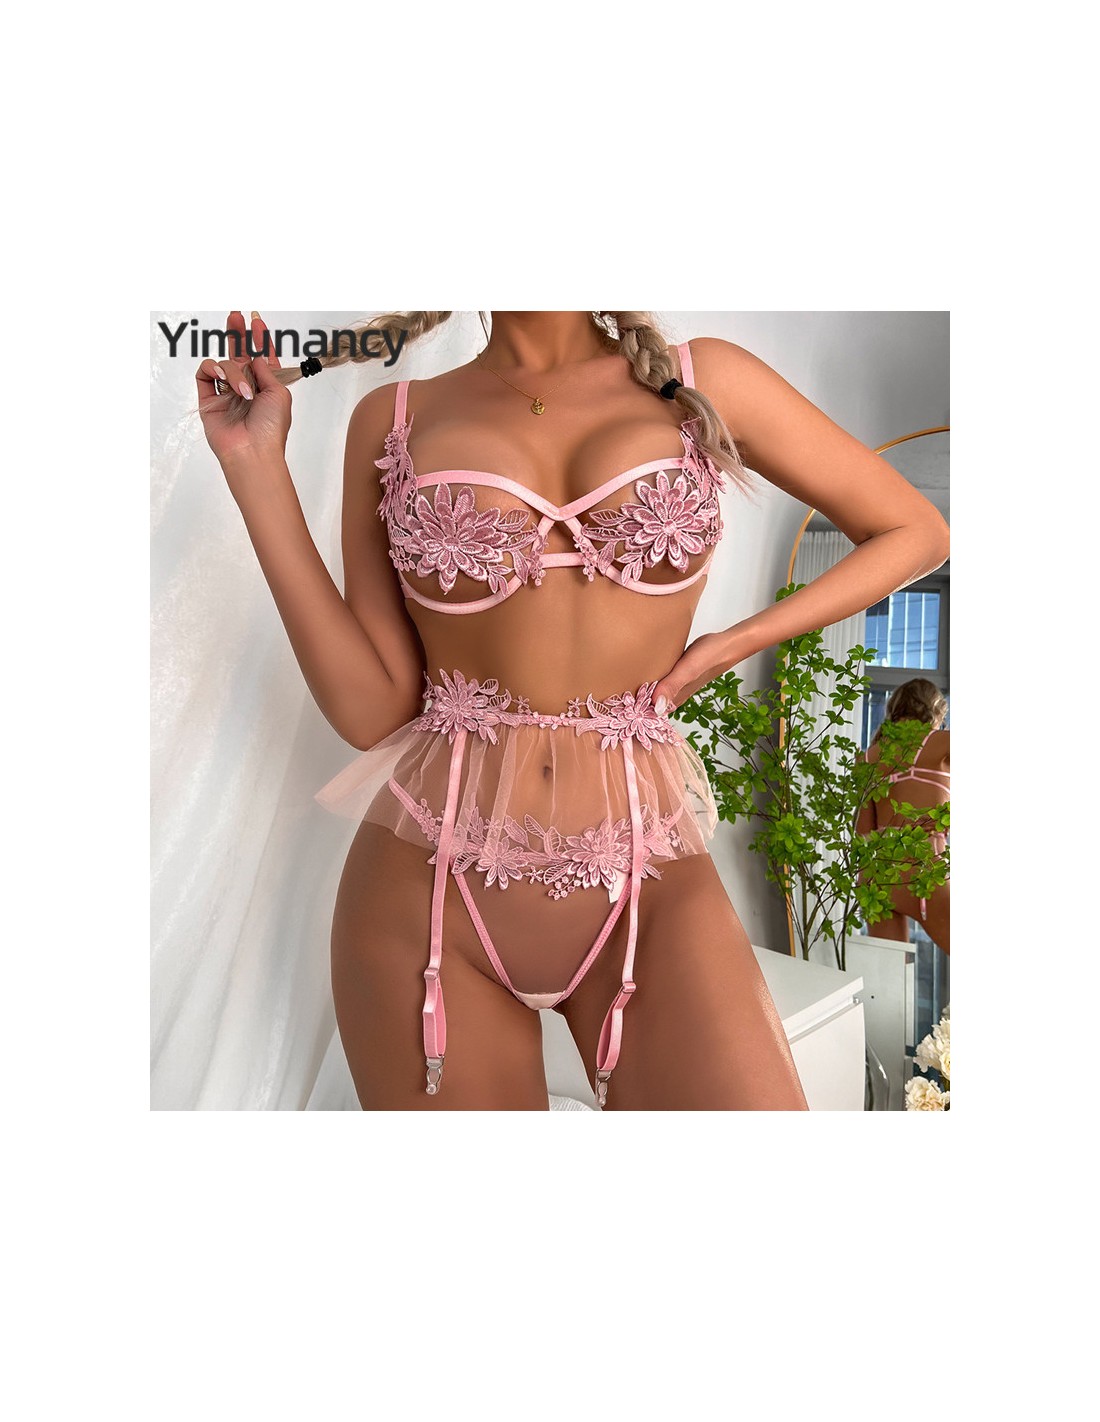 Yimunancy Lace Flower Bra Set With Floral Embroidery For Women Transparent  Khaki Panty 230825 From Kang01, $9.5